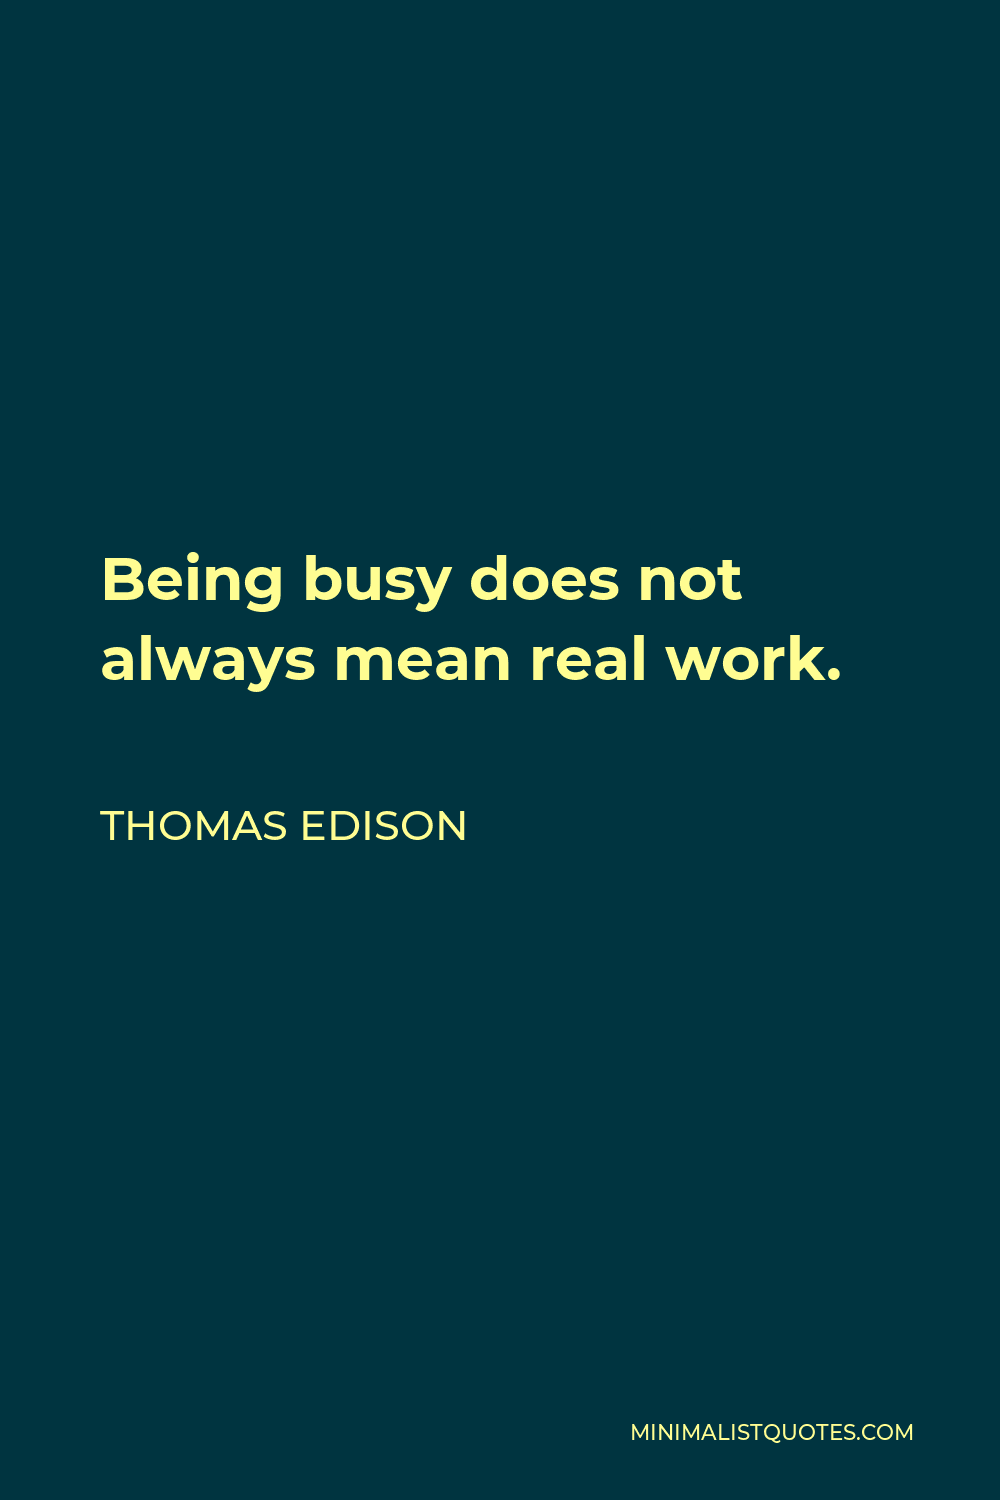 Thomas Edison Quote - Being busy does not always mean real work.